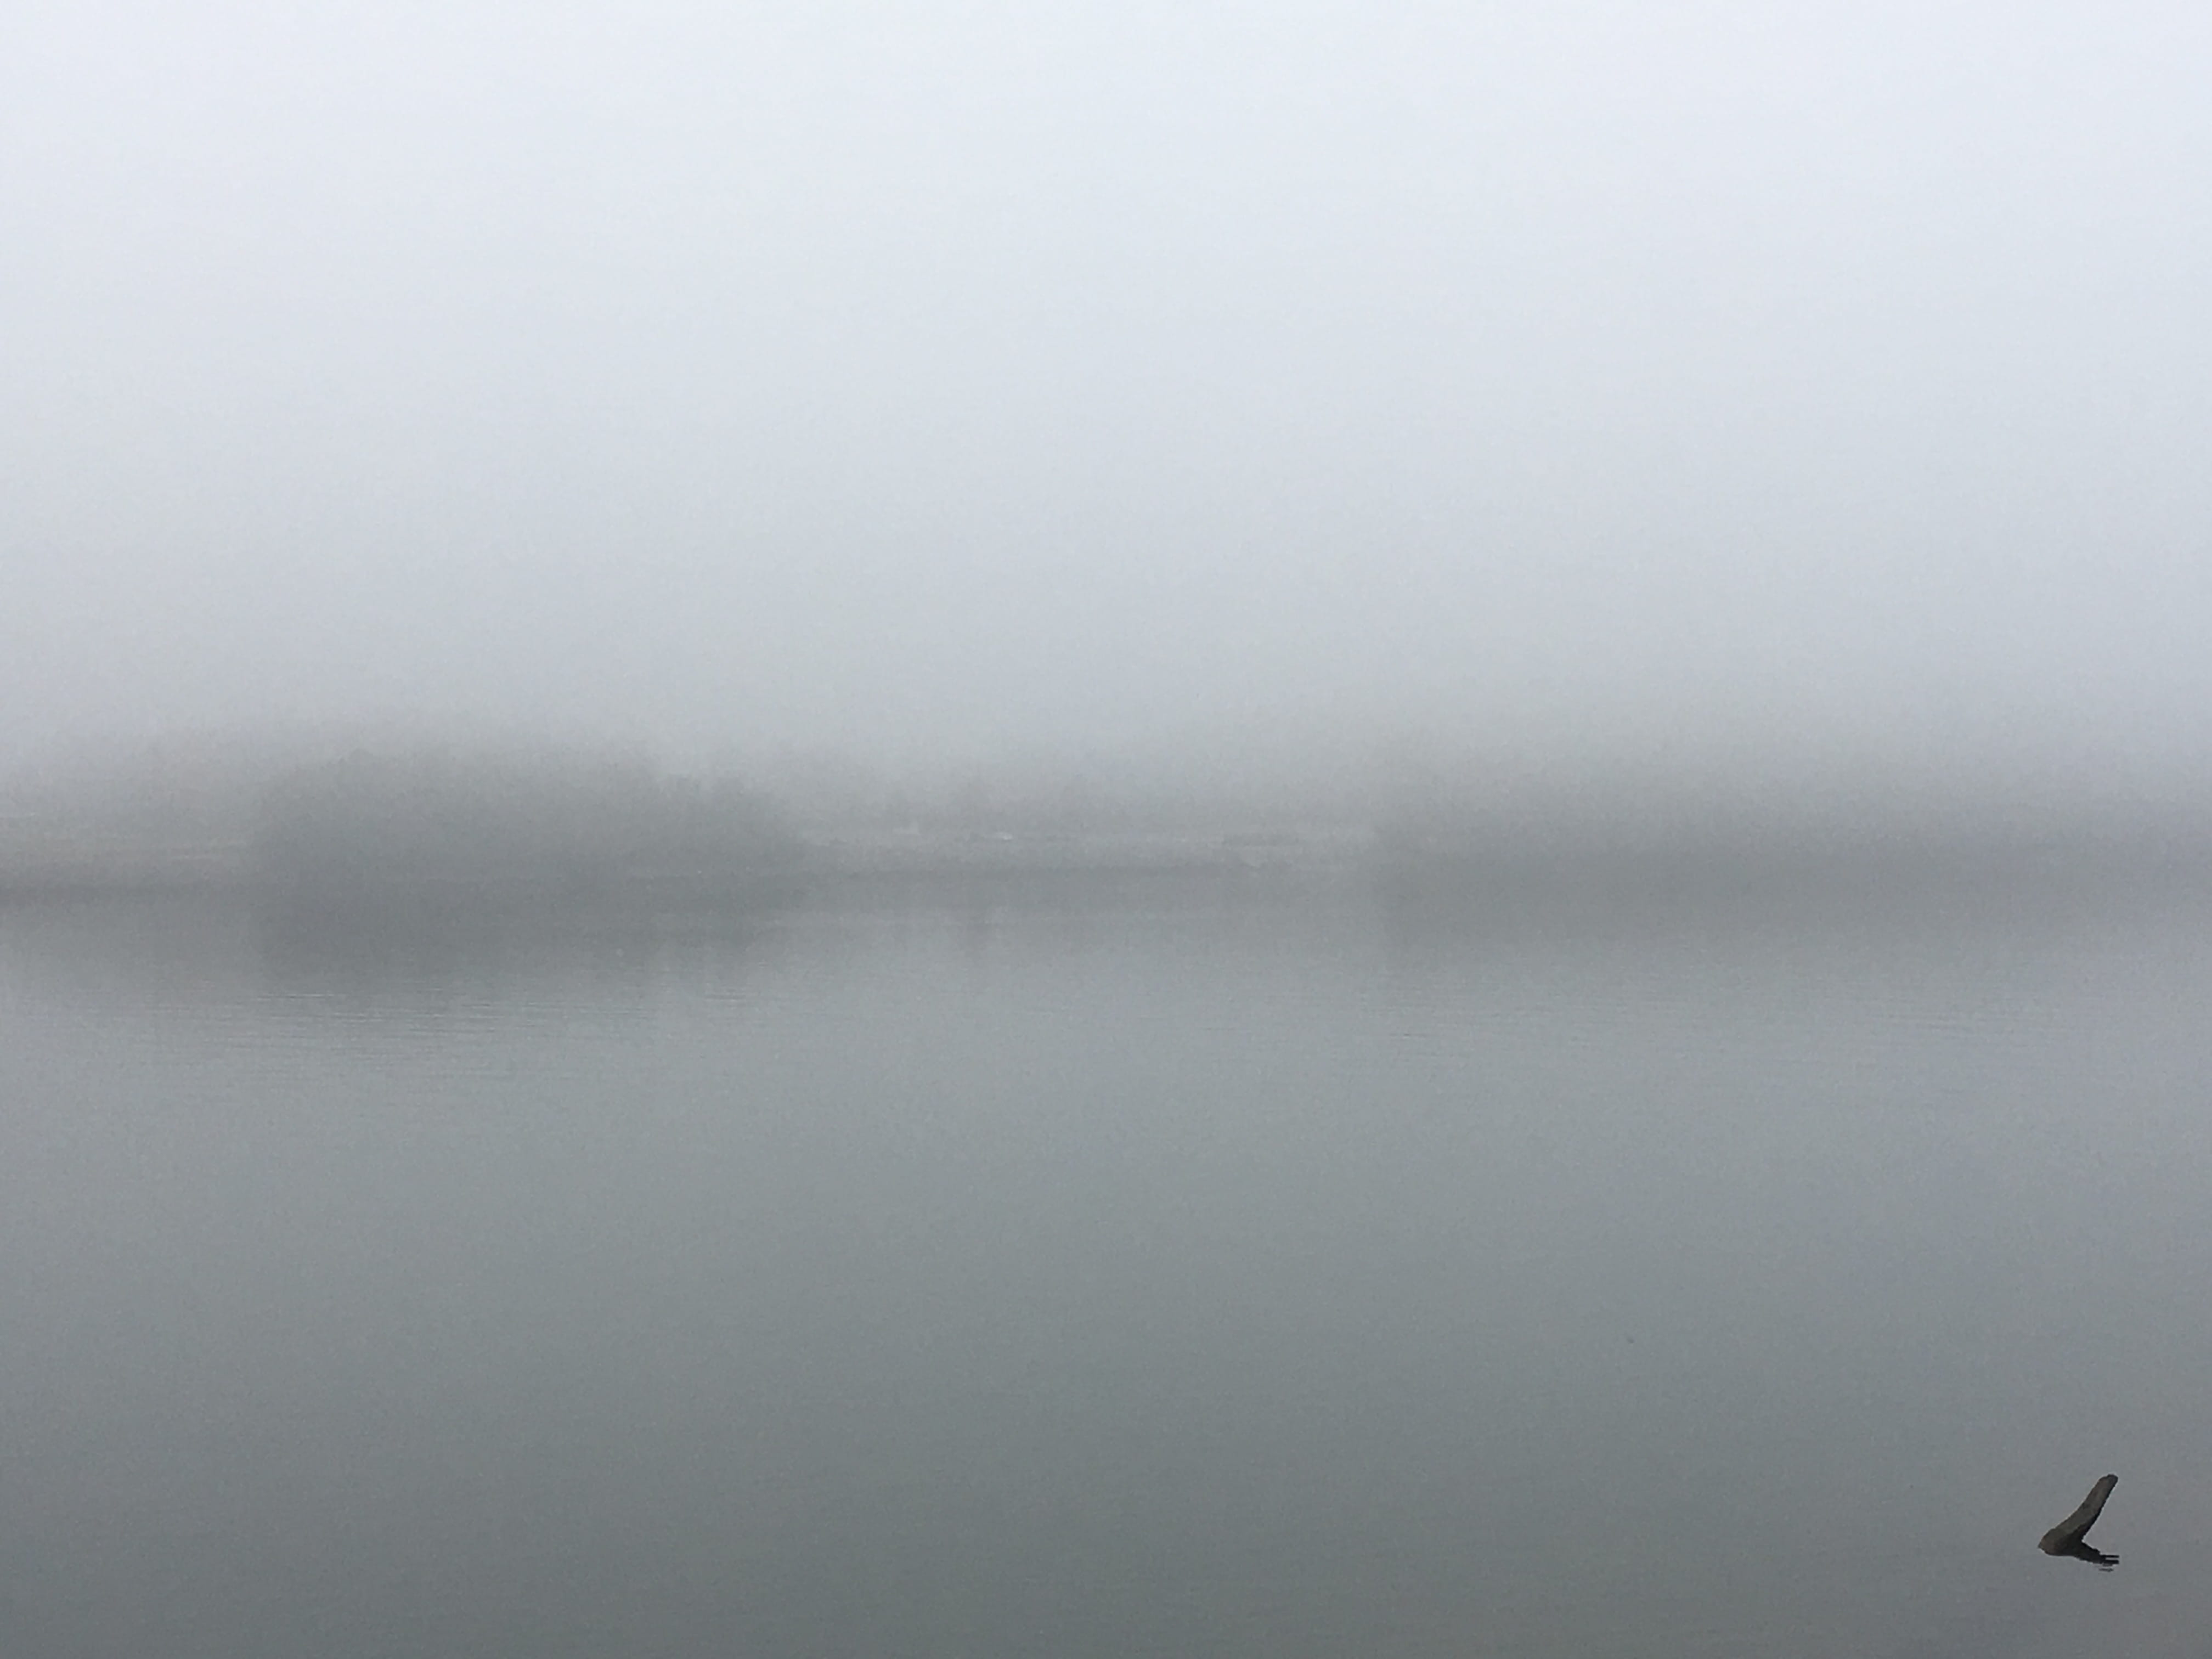 united states, chattanooga, ambient, river, calm, water, fog